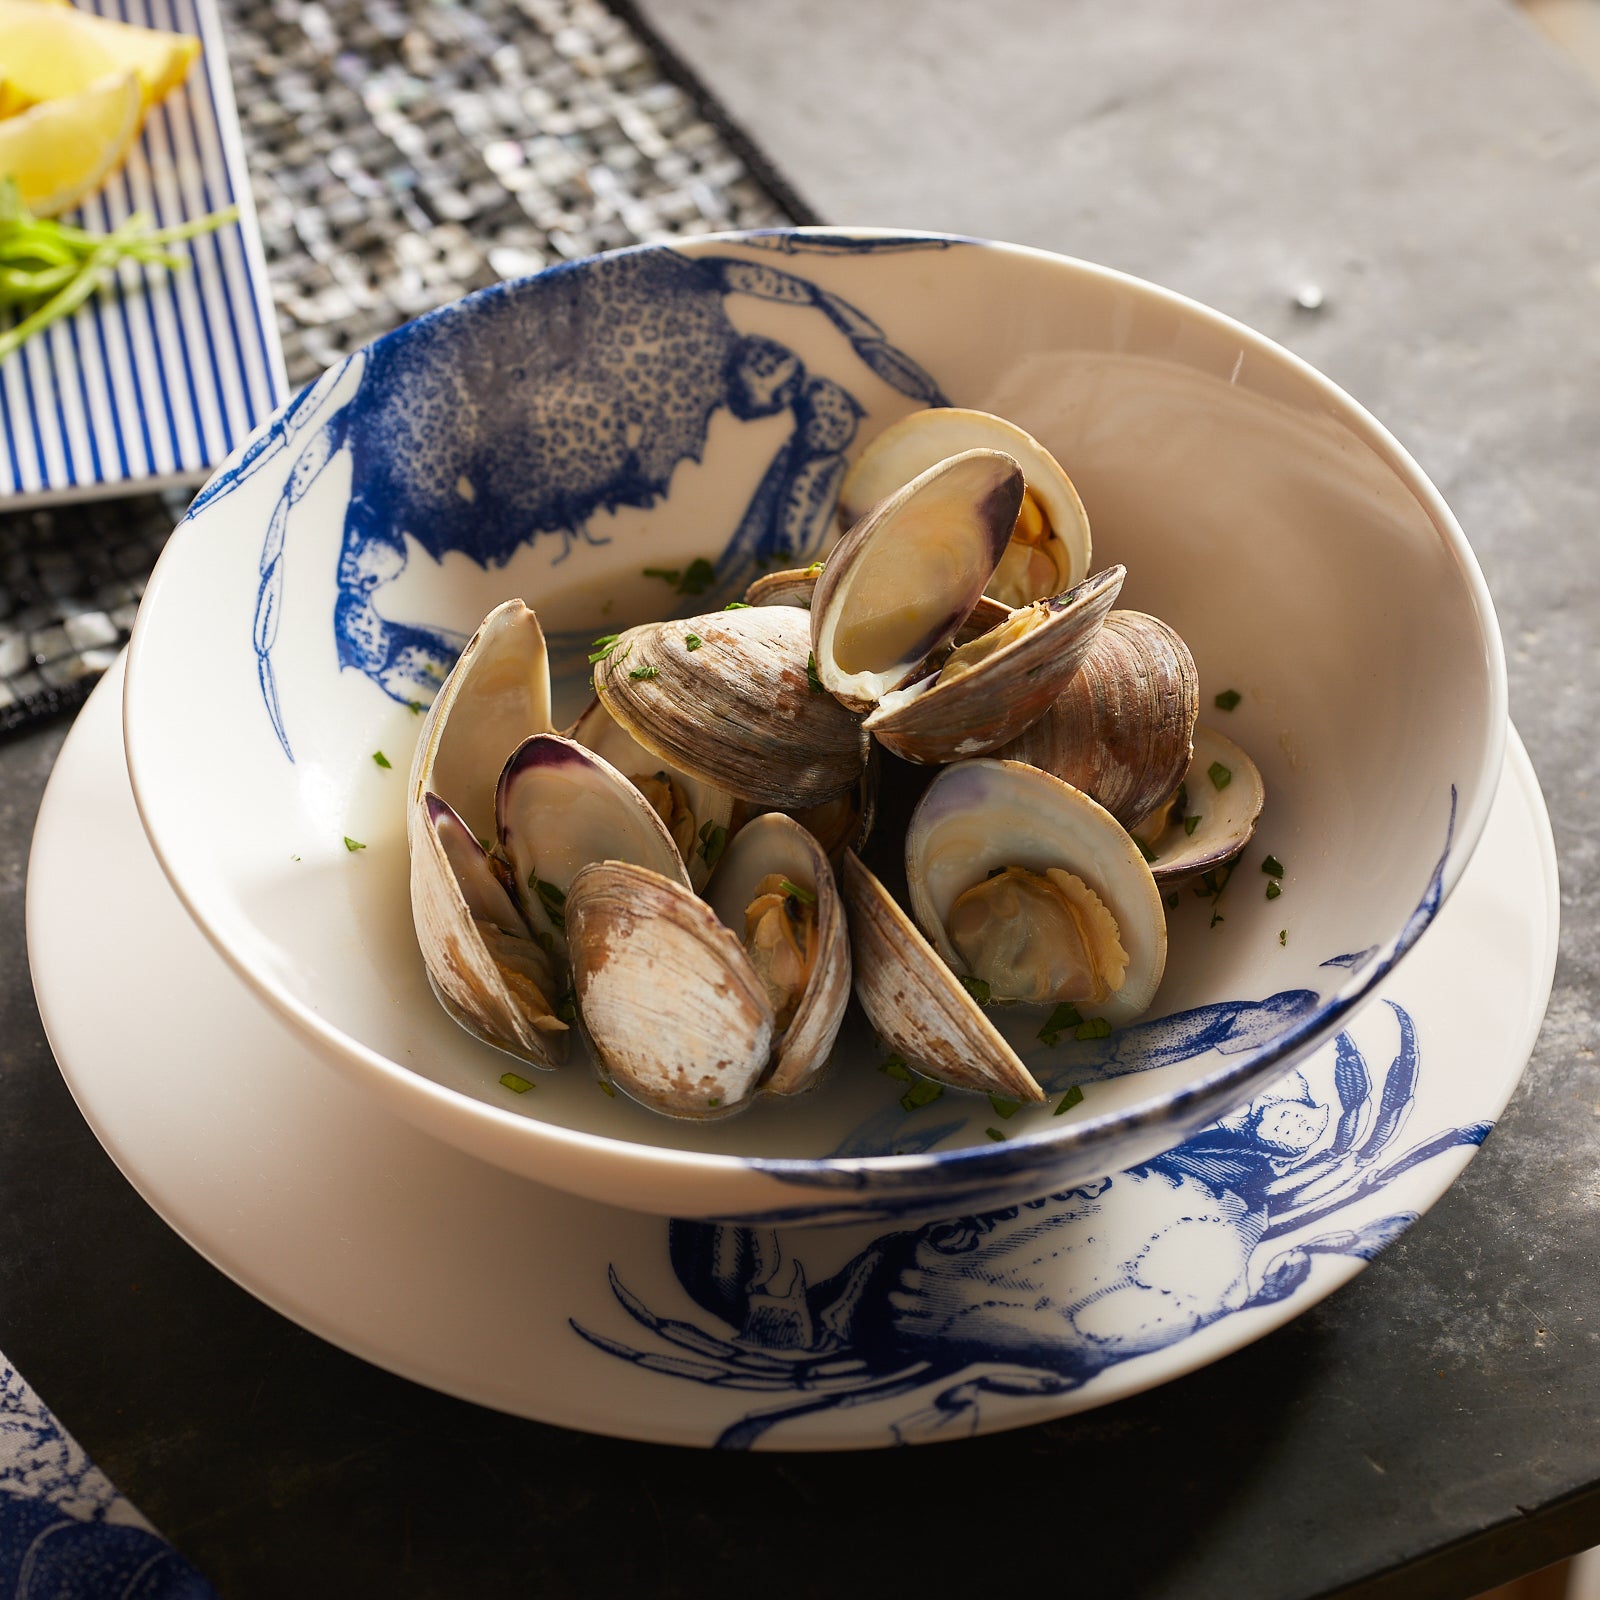 A white ceramic bowl with a blue crab pattern on both the interior and exterior, crafted from high-fired porcelain for added durability. This elegant piece, the Crab Entrée Bowl by Caskata Artisanal Home, is also dishwasher and microwave safe, making it both beautiful and practical for everyday use.